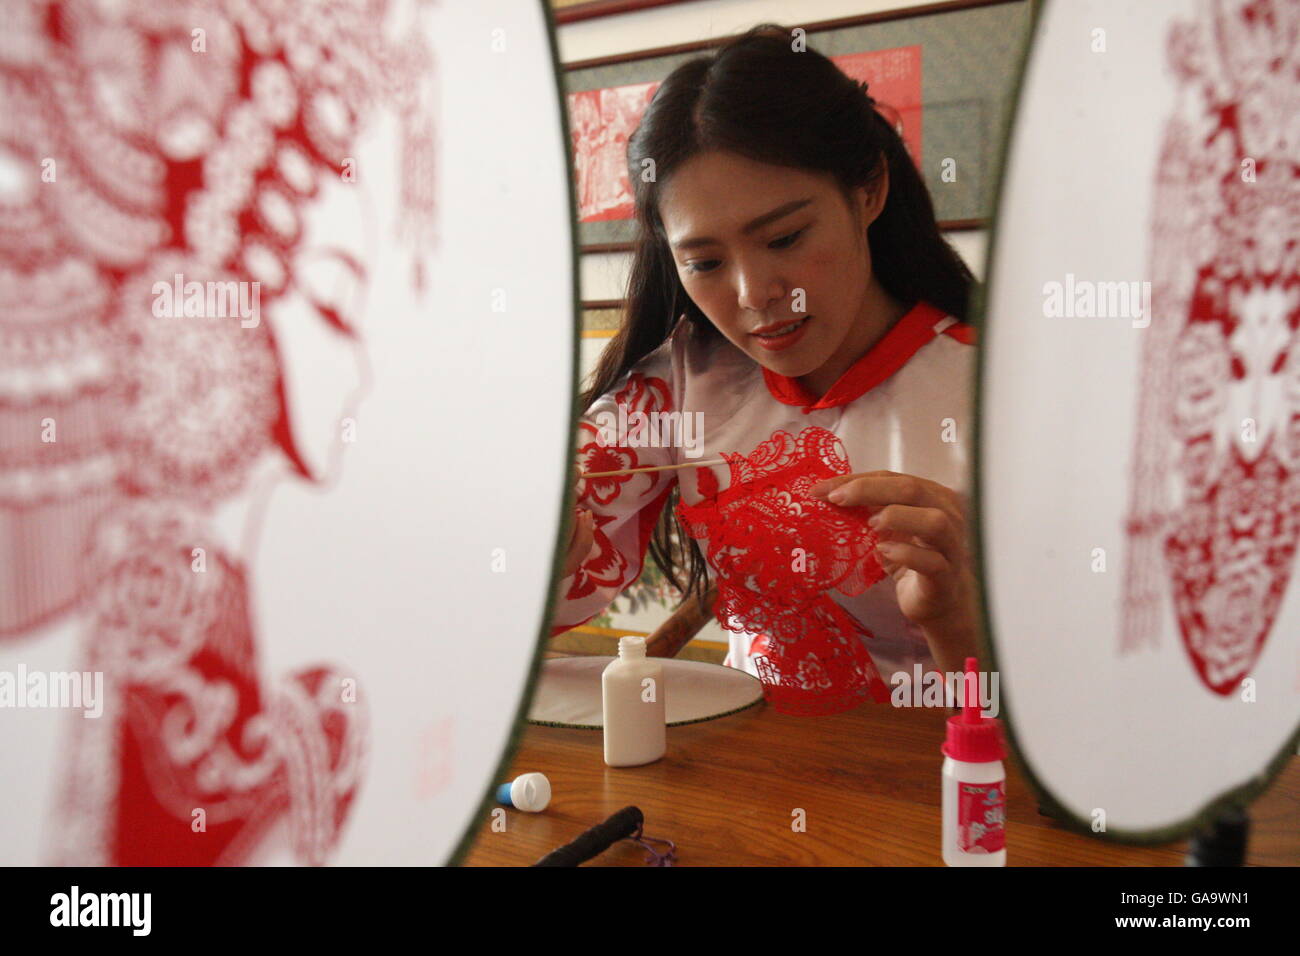 (160804) -- YANTAI, Aug. 4, 2016 (Xinhua) -- Liang Qiaoyan, a paper cutting folk artist, works on her paper cuttings on fans at a studio in Yantai, east China's Shandong Province, Aug. 3. 2016. Liang has made over 40 kinds of handiworks of paper cutting as she combined the cutting with porcelain, statue, cloth and etc. (Xinhua/Shen Jizhong) (wyl) Stock Photo